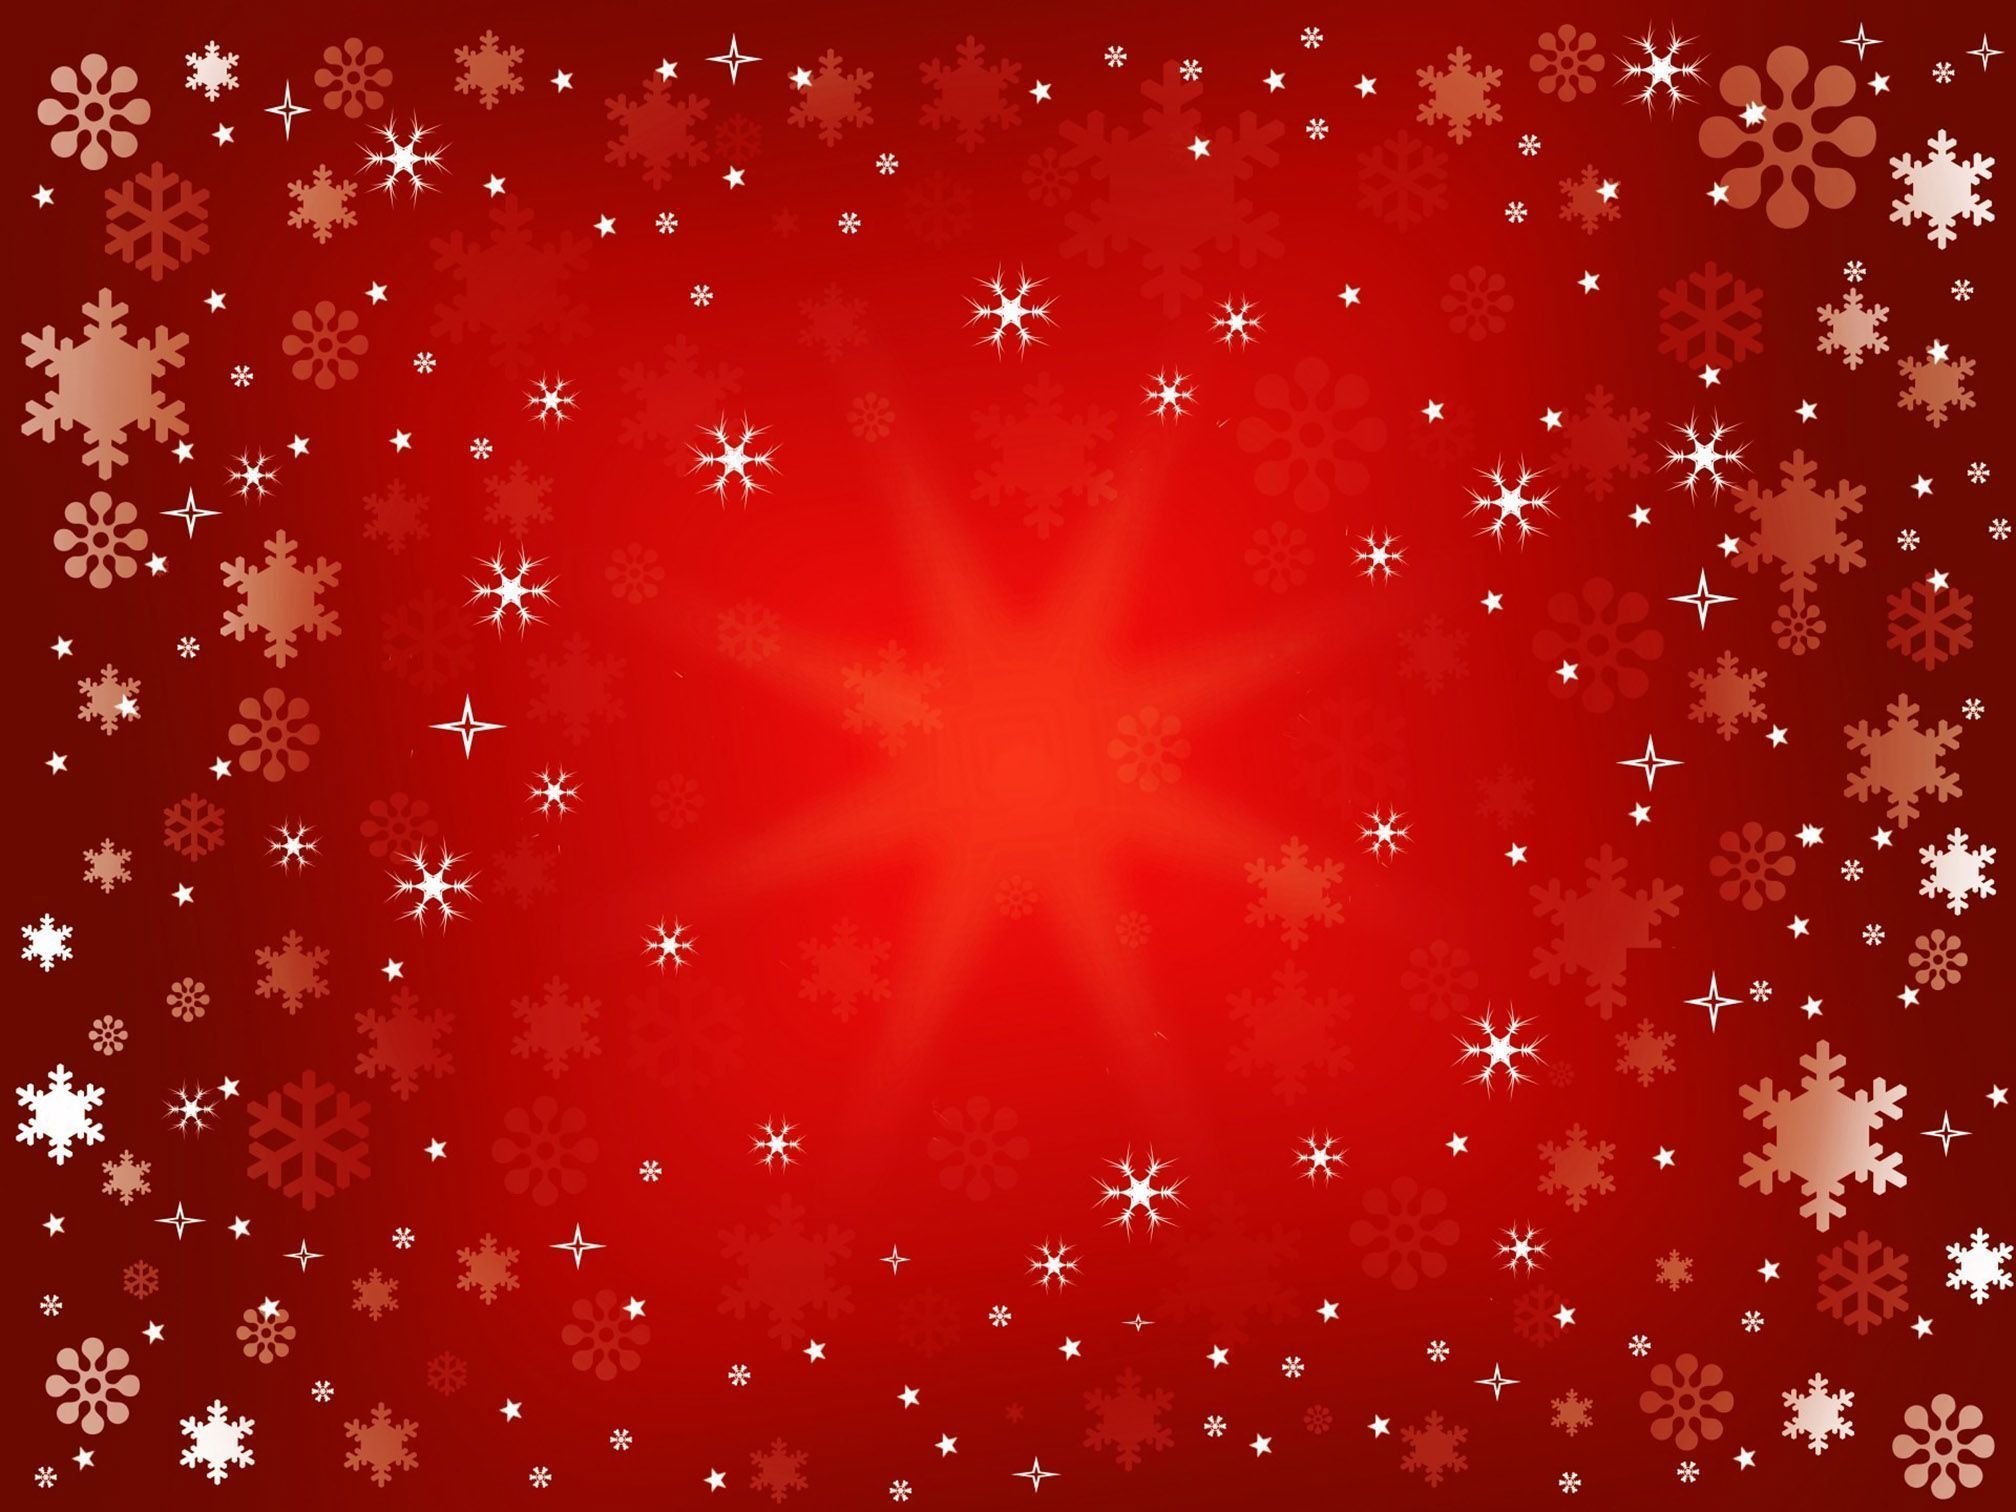 35 Stars at Xmas Background Images, Cards or Christmas Wallpapers ...